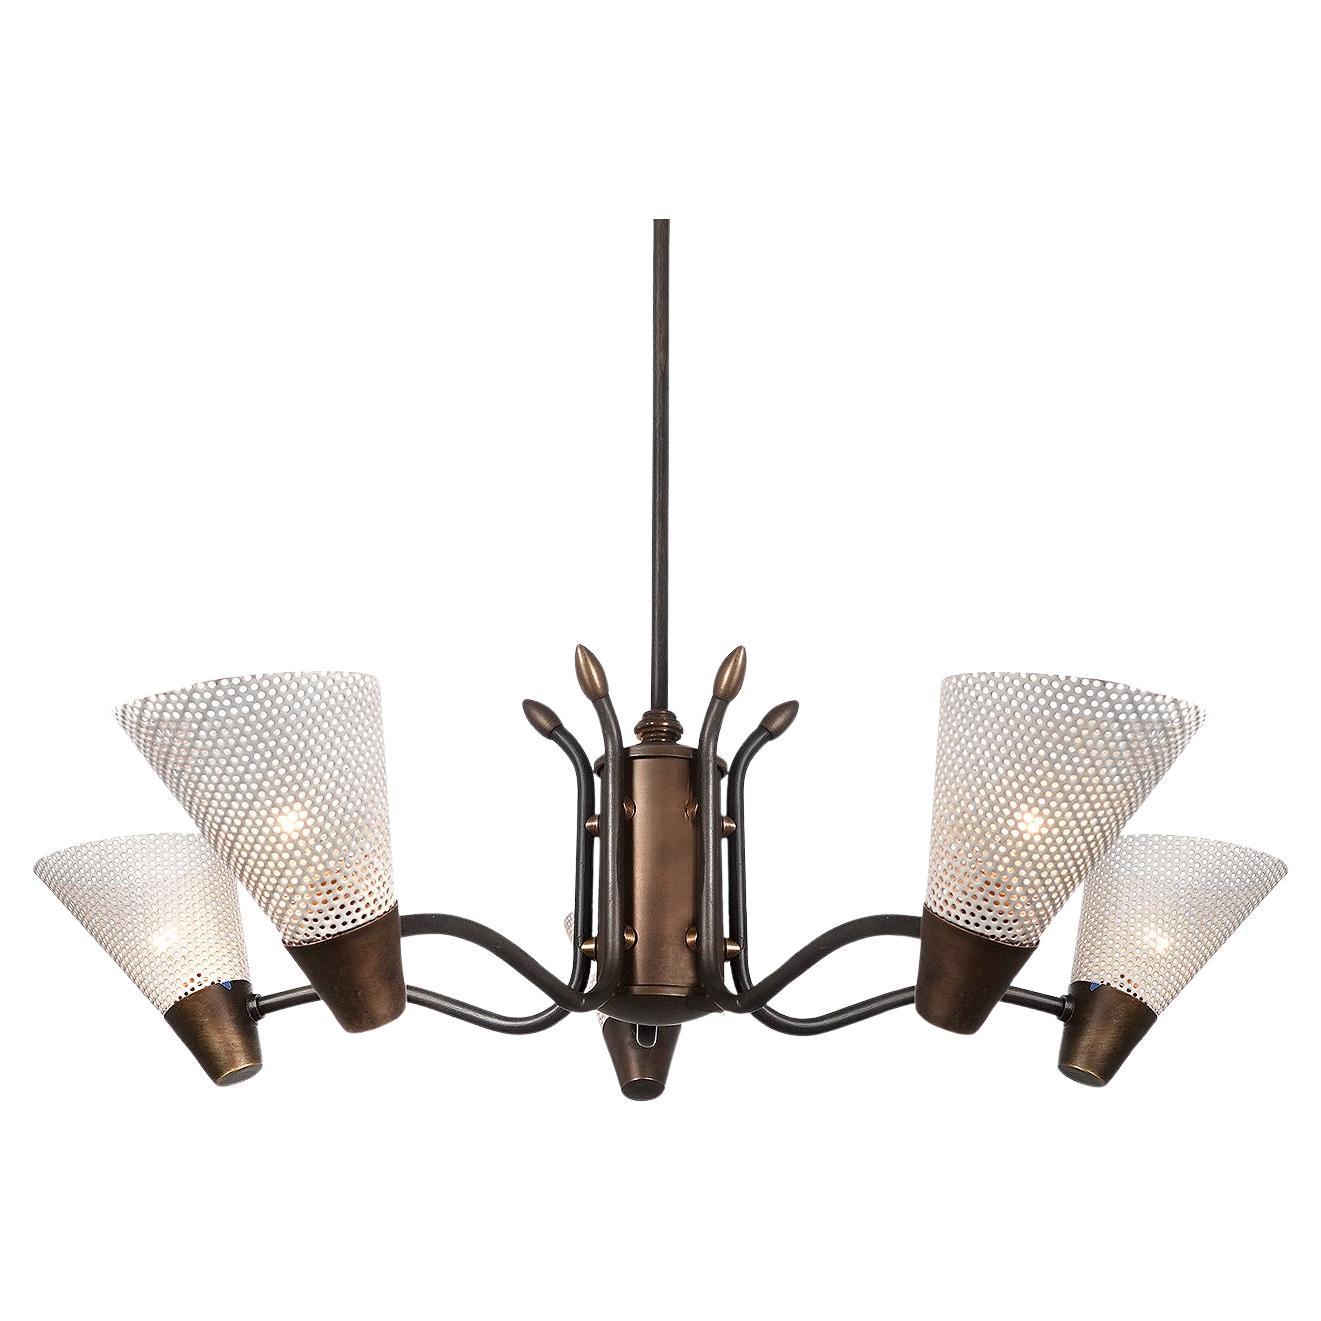 Nice Original Mid-Century Modern 5 Light Perforated Shade Chandelier For Sale